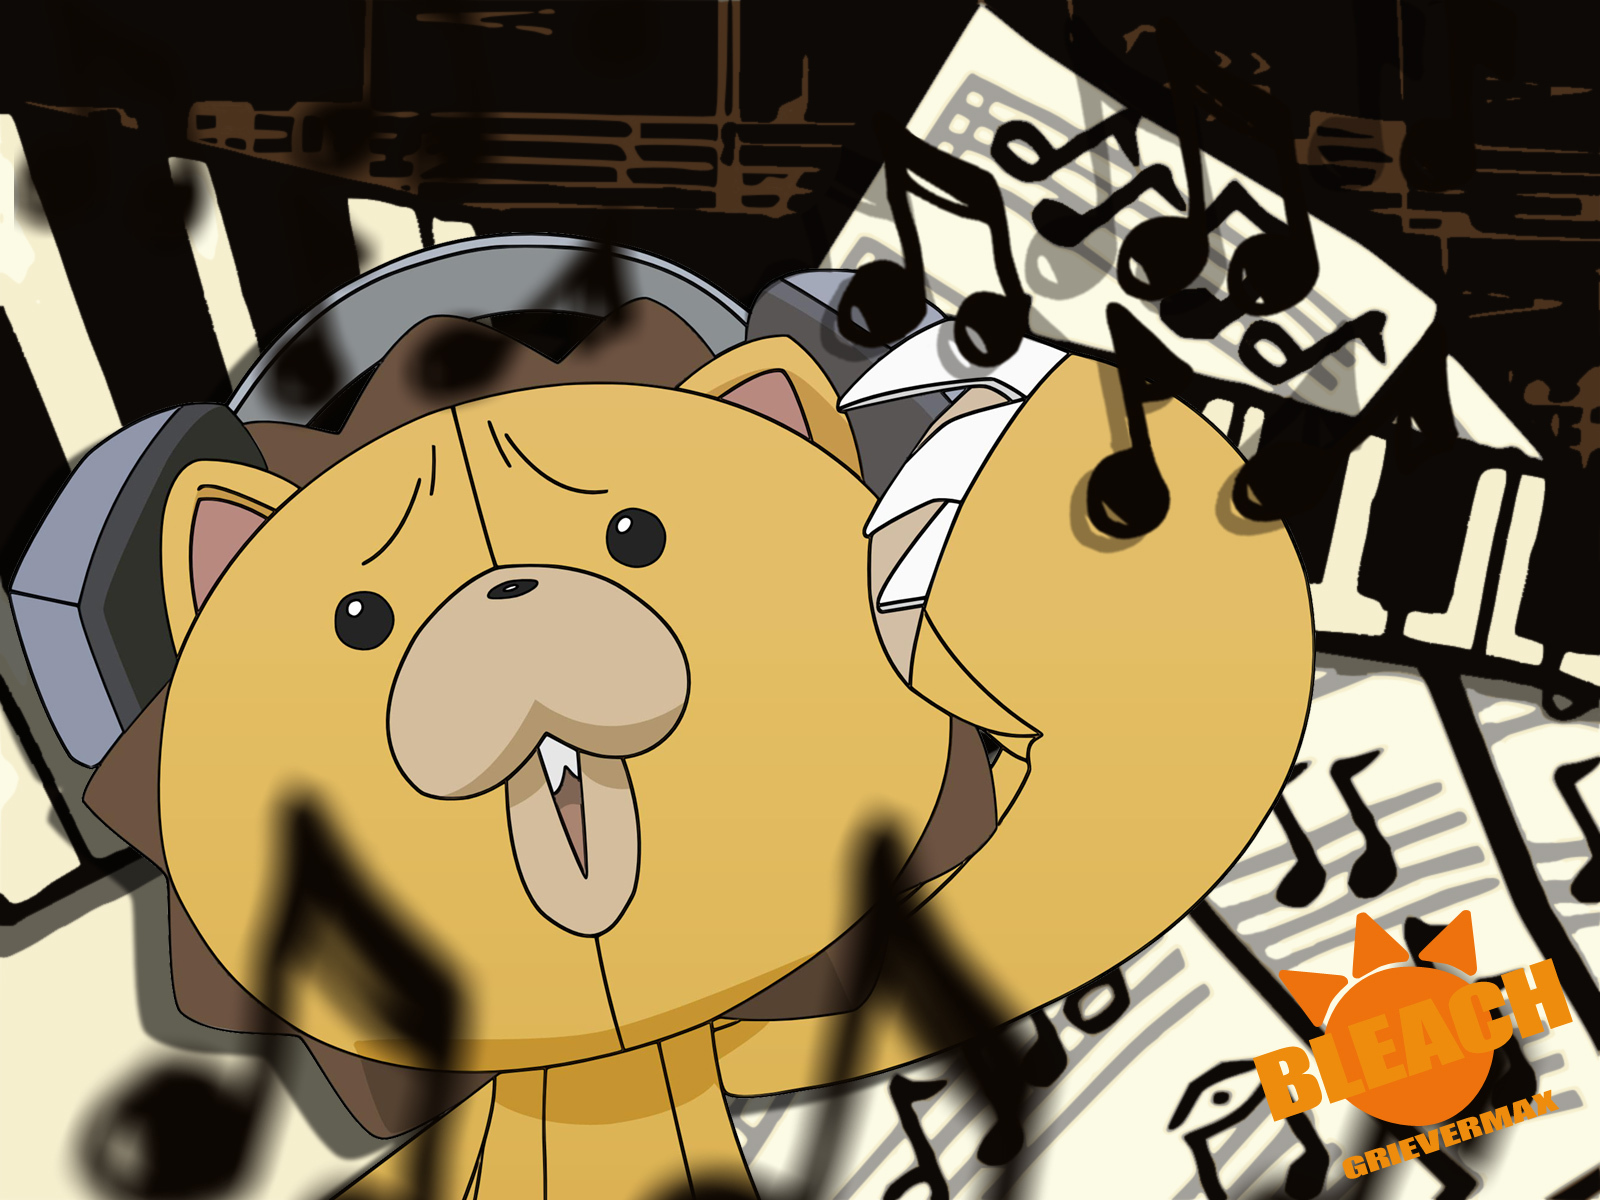 Kon With Headphones On In A Music Notes The Background